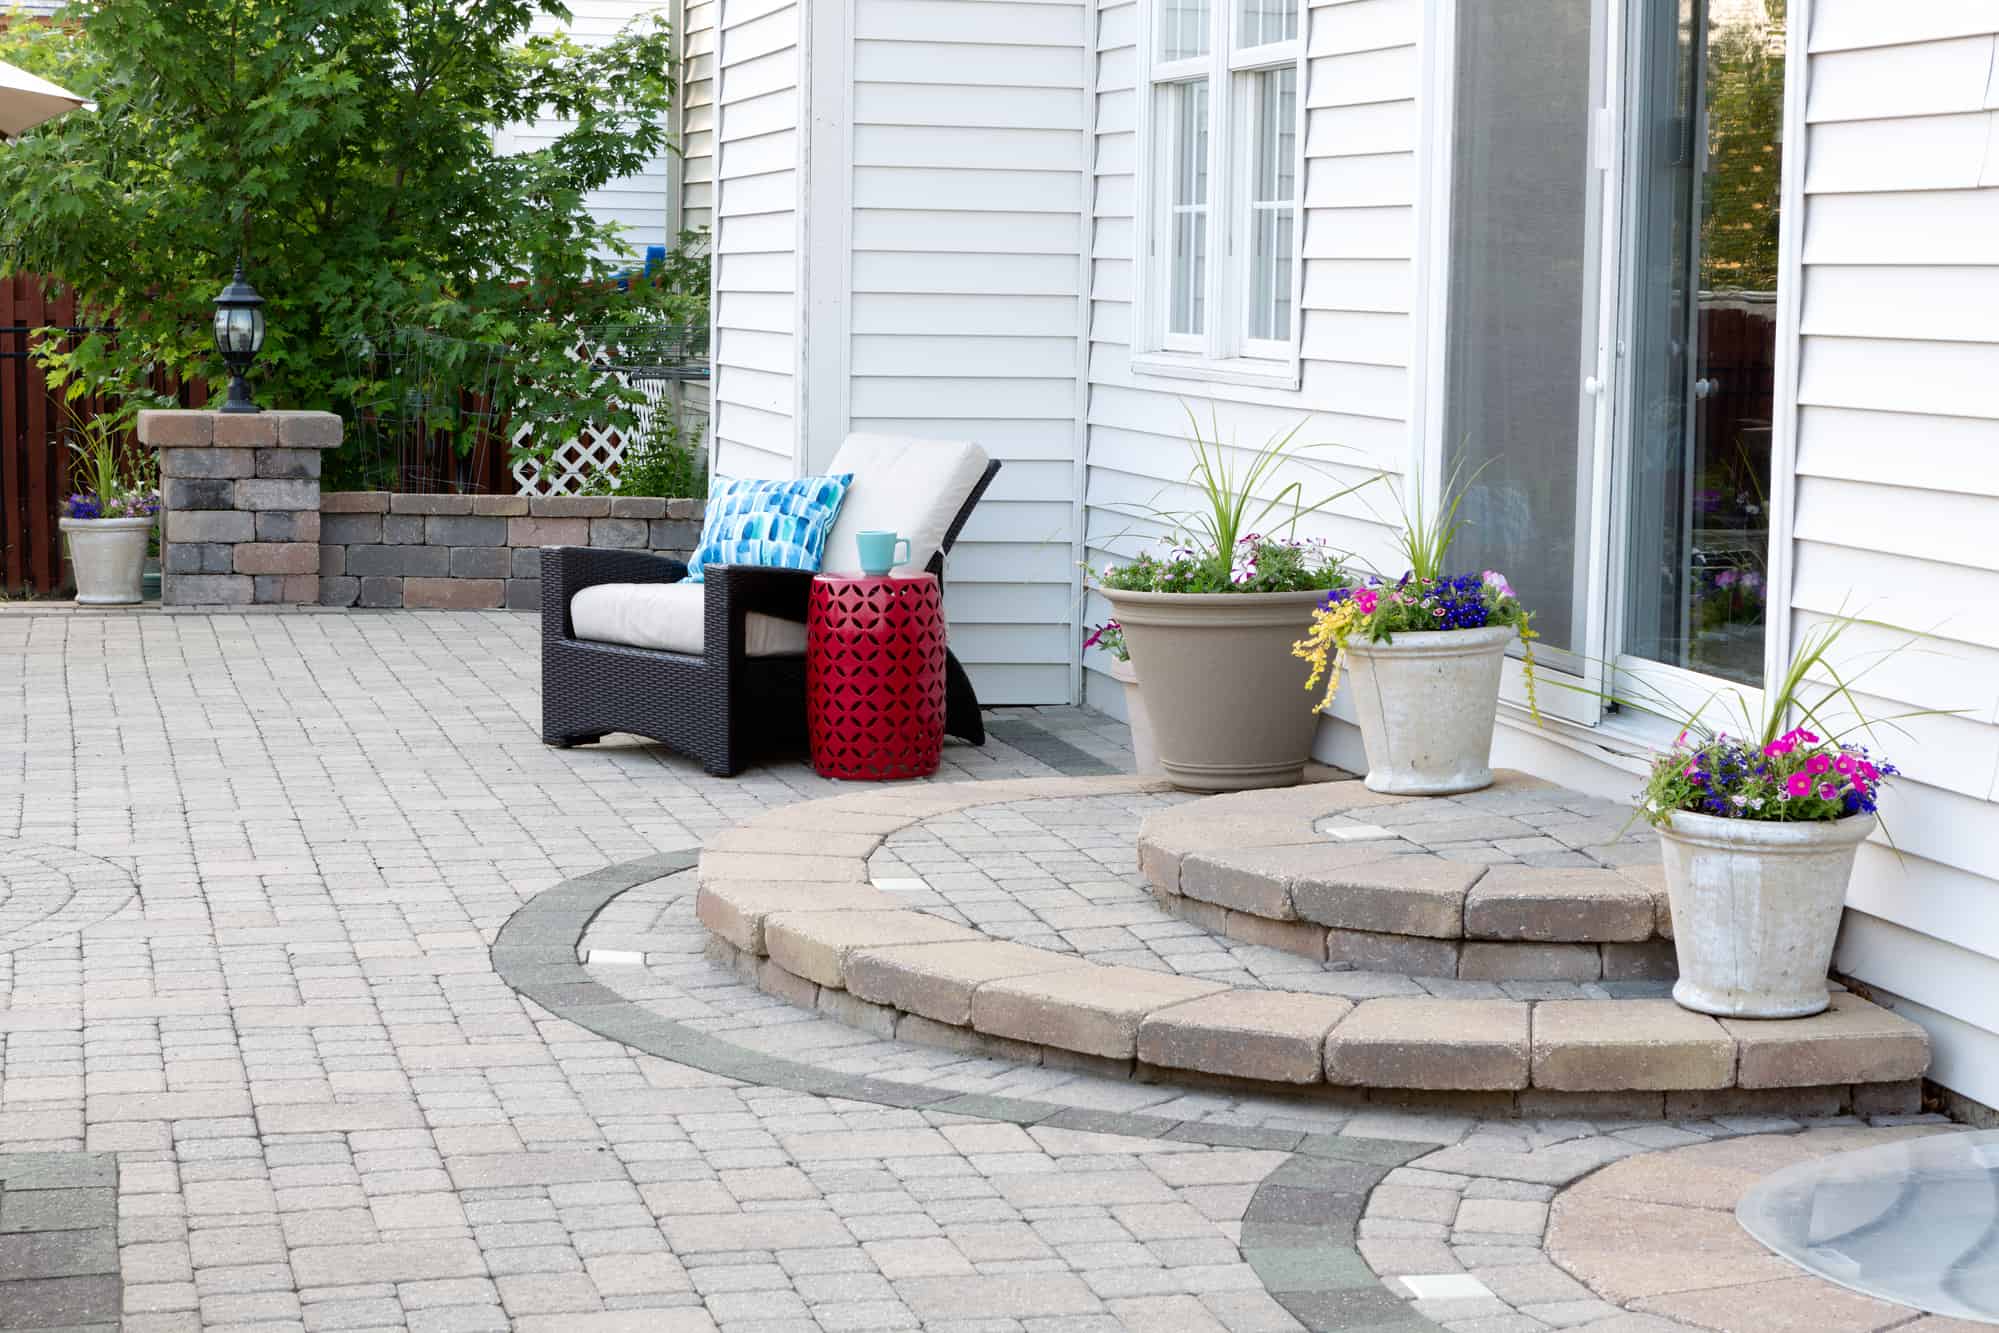 The Cheapest Way To Build a Patio — It’s Less Expensive Than You Think